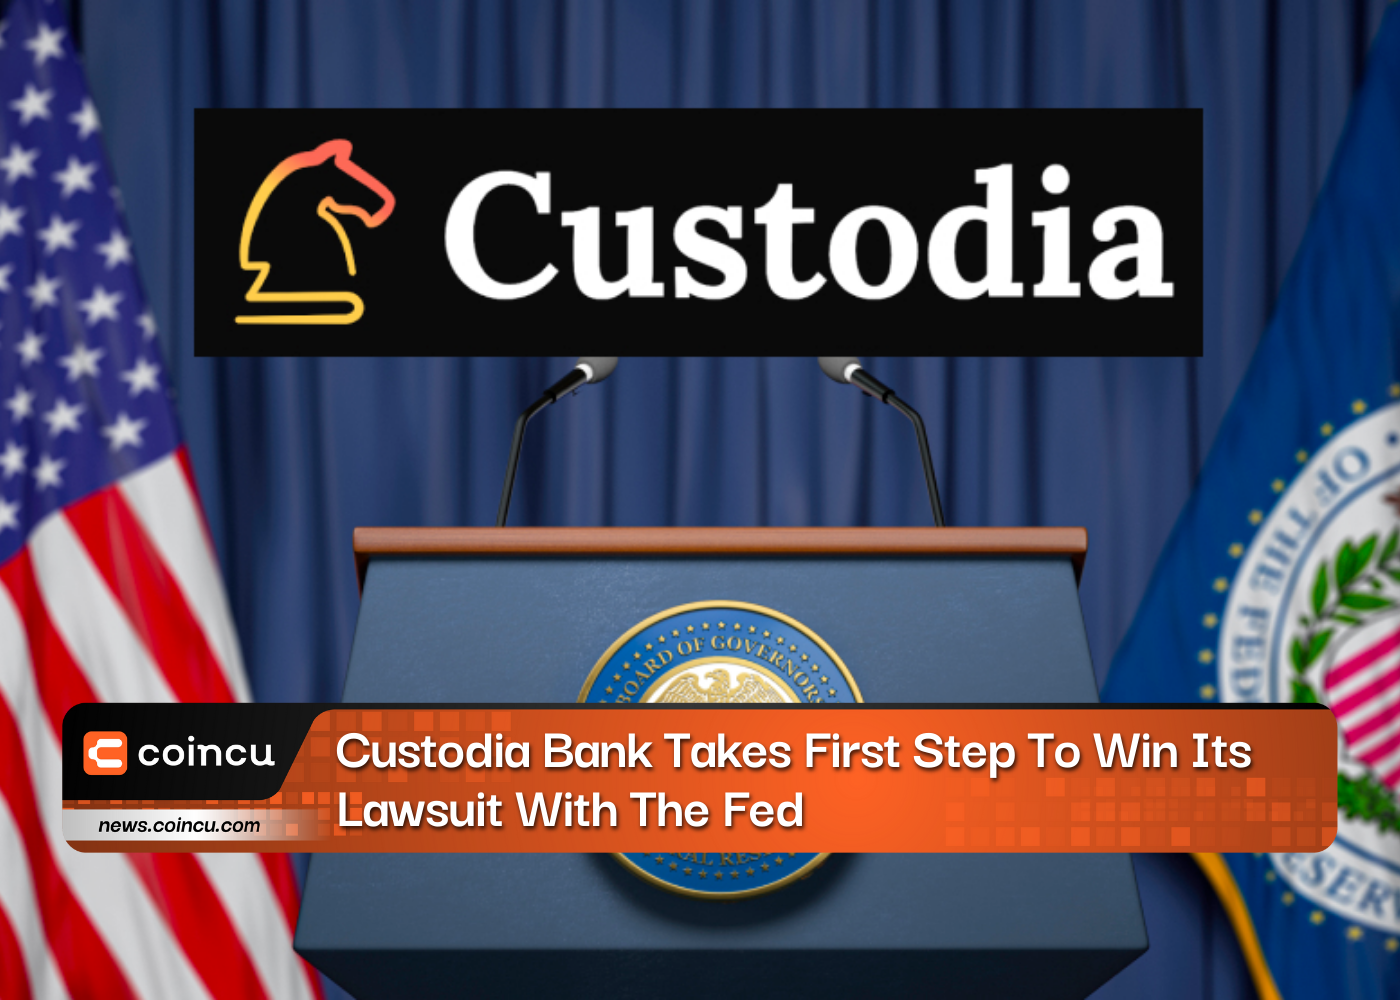 Custodia Bank Takes First Step To Win Its Lawsuit With The Fed